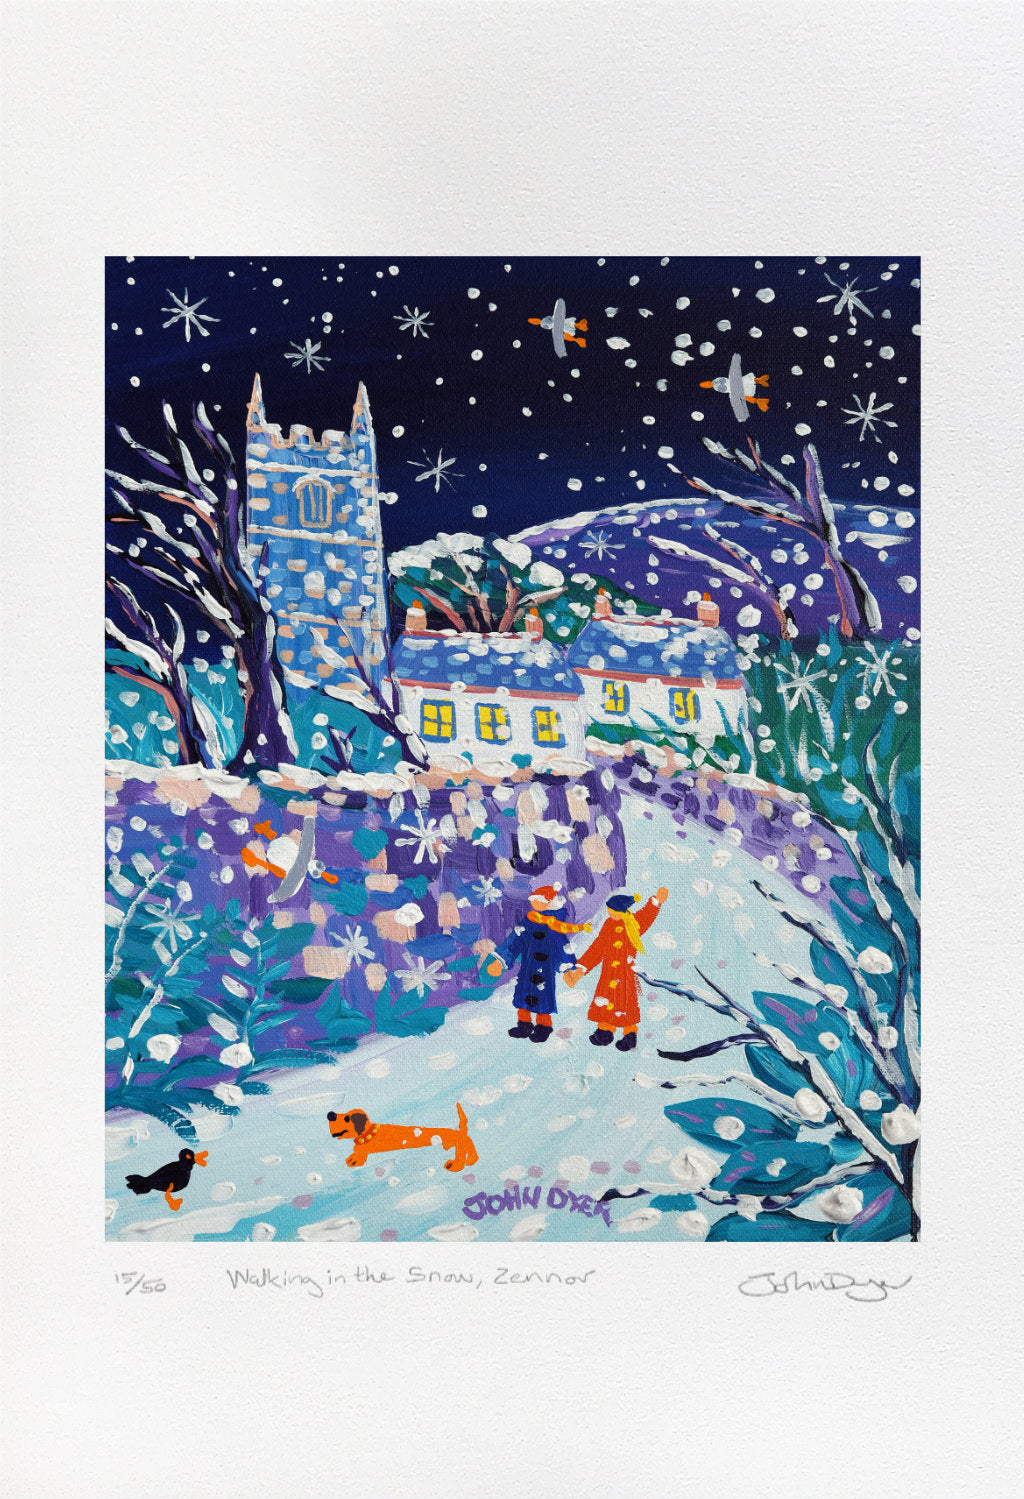 John Dyer Limited Edition Print. &#39;Walking in the Snow, Zennor&#39;. Cornwall Art Gallery Print.